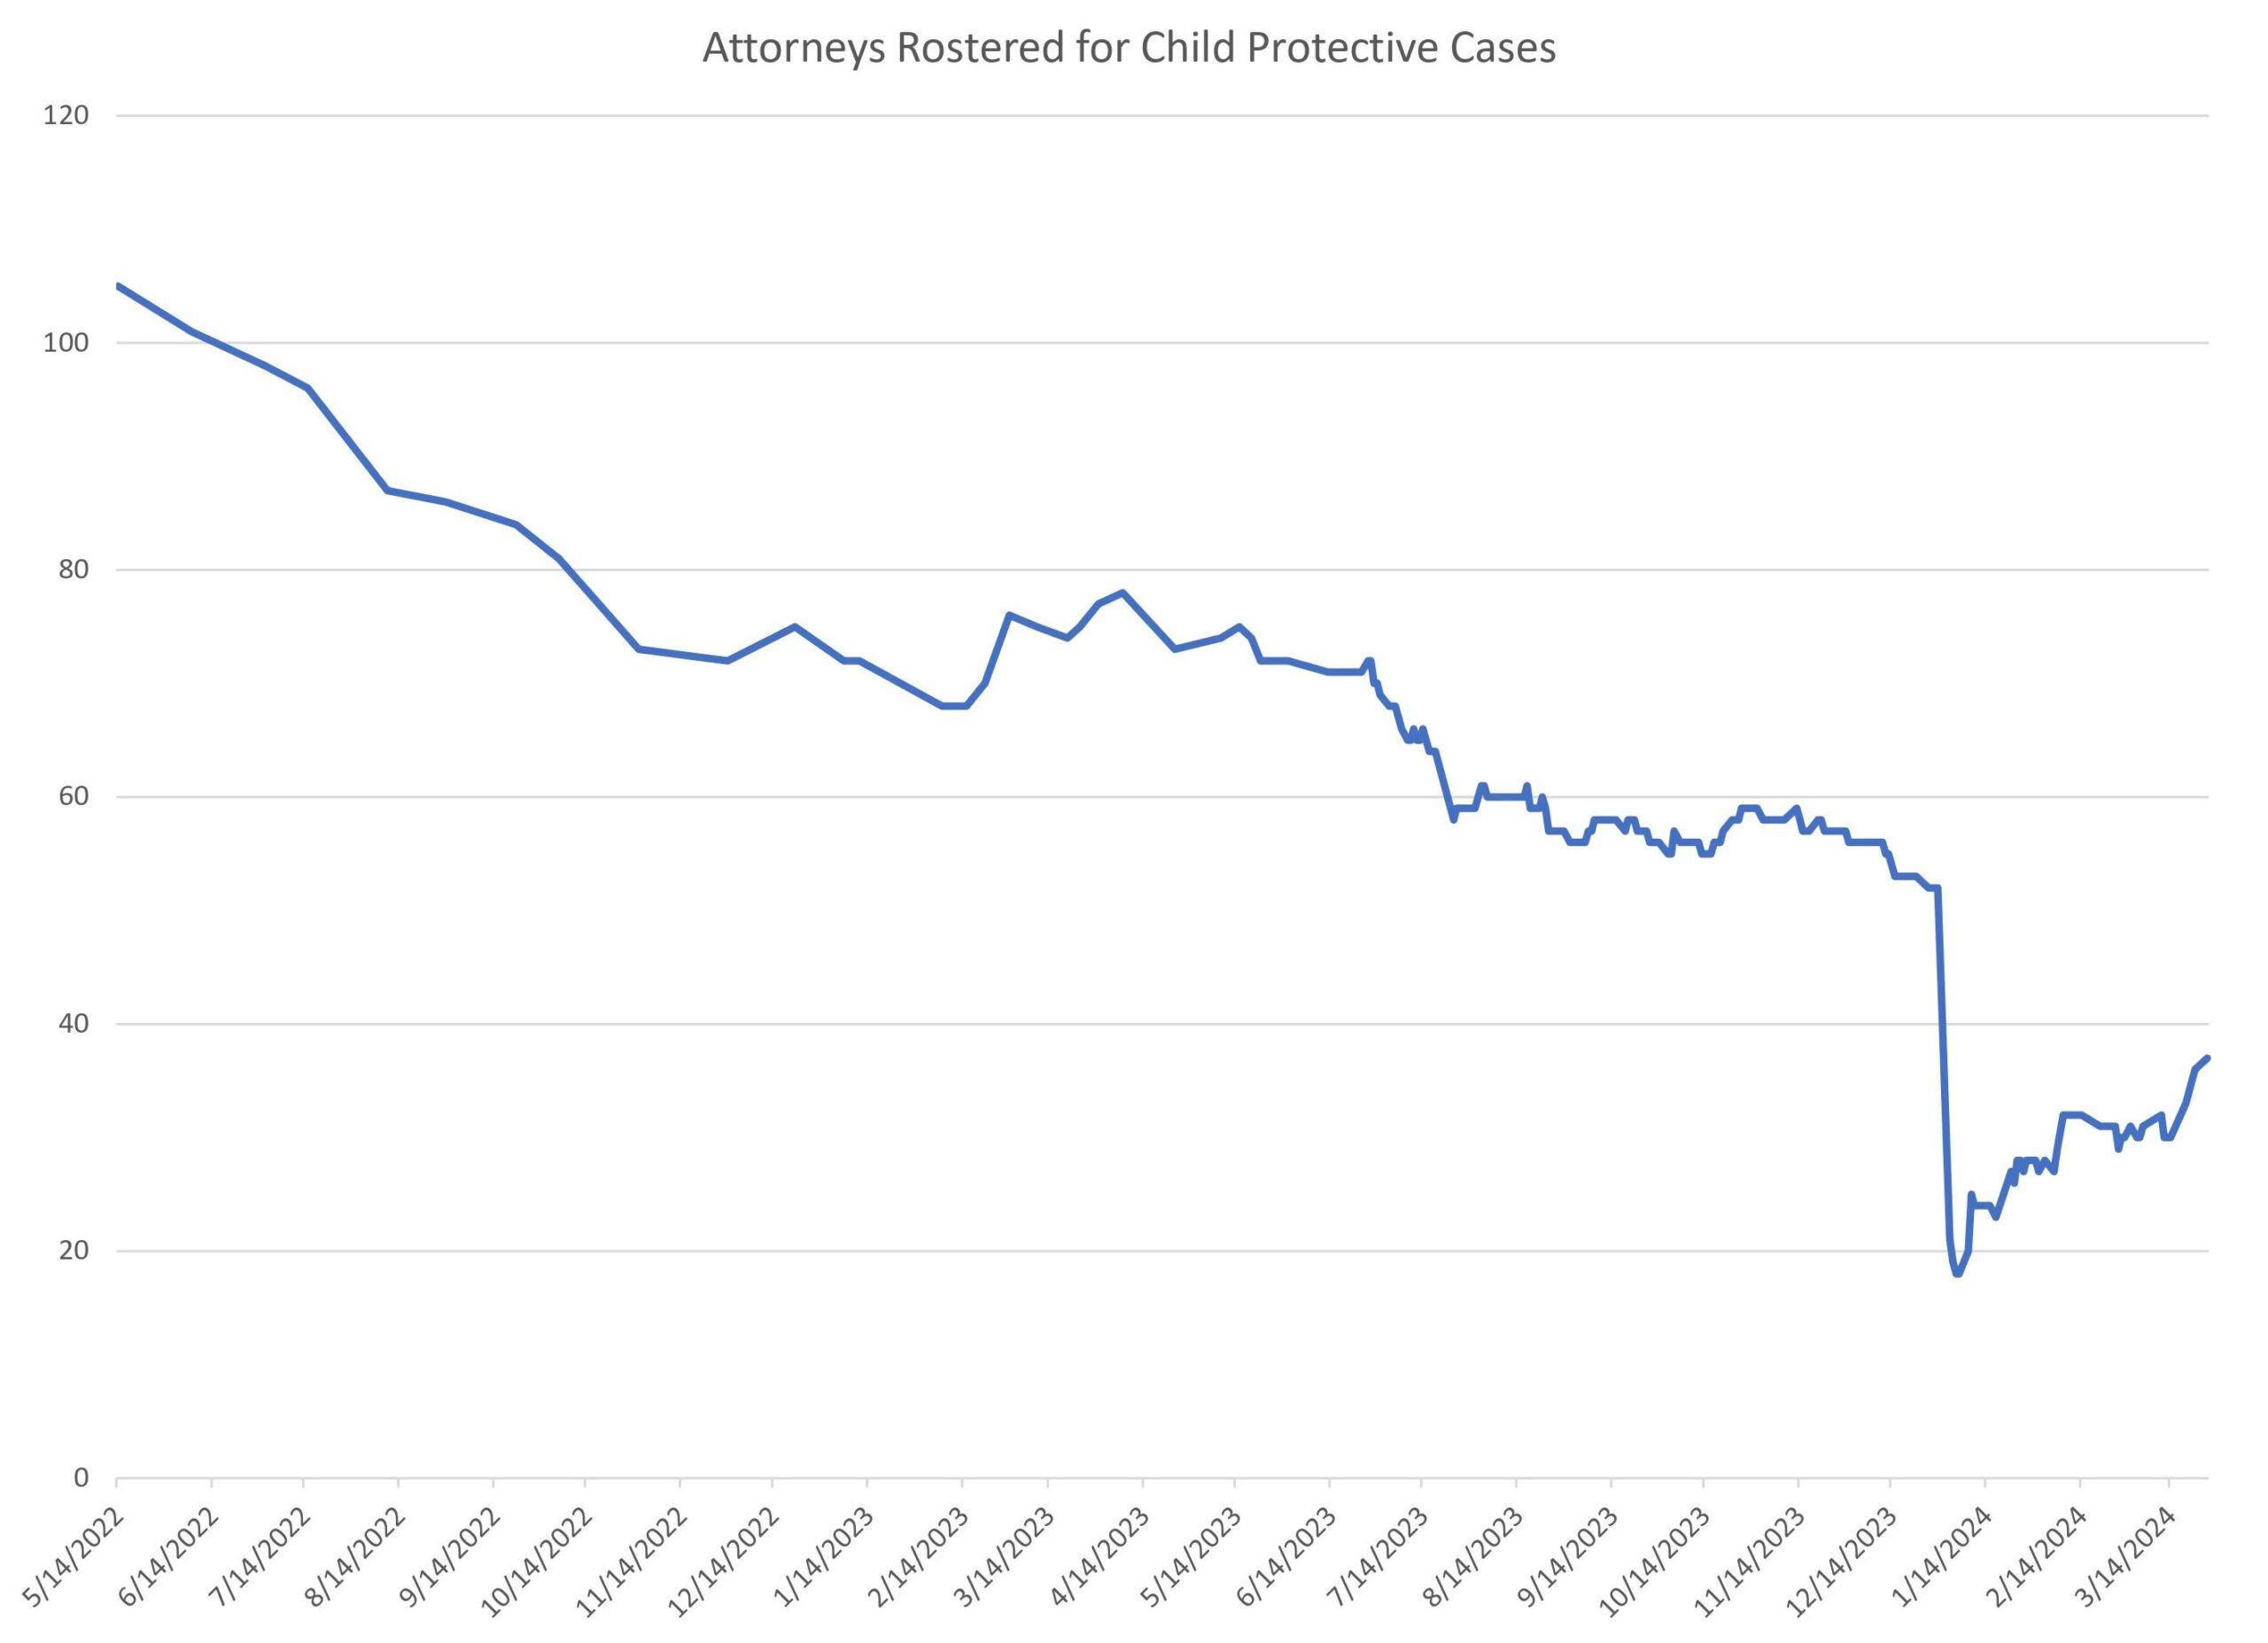 A graphic showing the number of attorneys that are available to be assigned to child protective cases has declined in recent months.